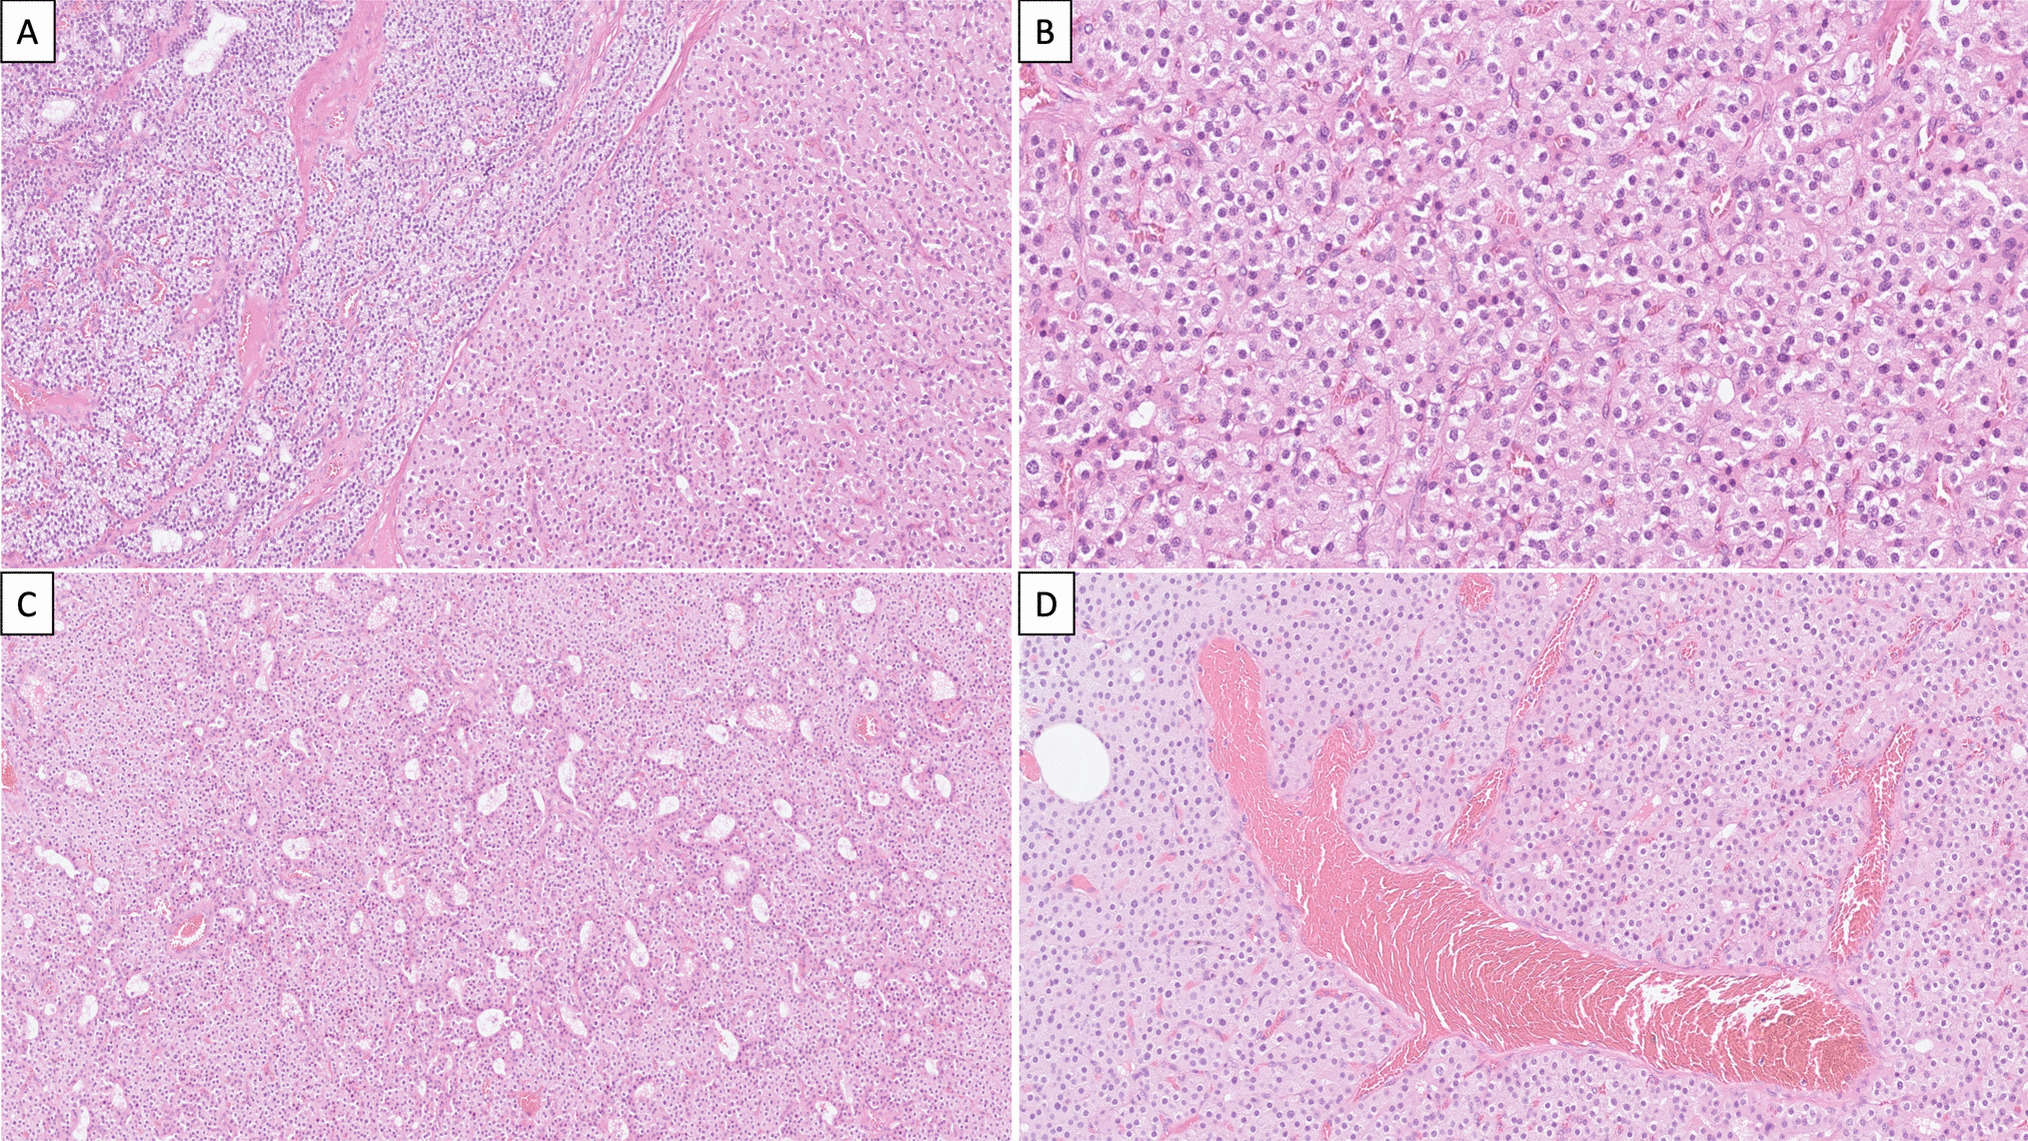 Not All Parafibromin Deficiency Relates to Parathyroid Carcinoma: The Role of Morphological Assessment